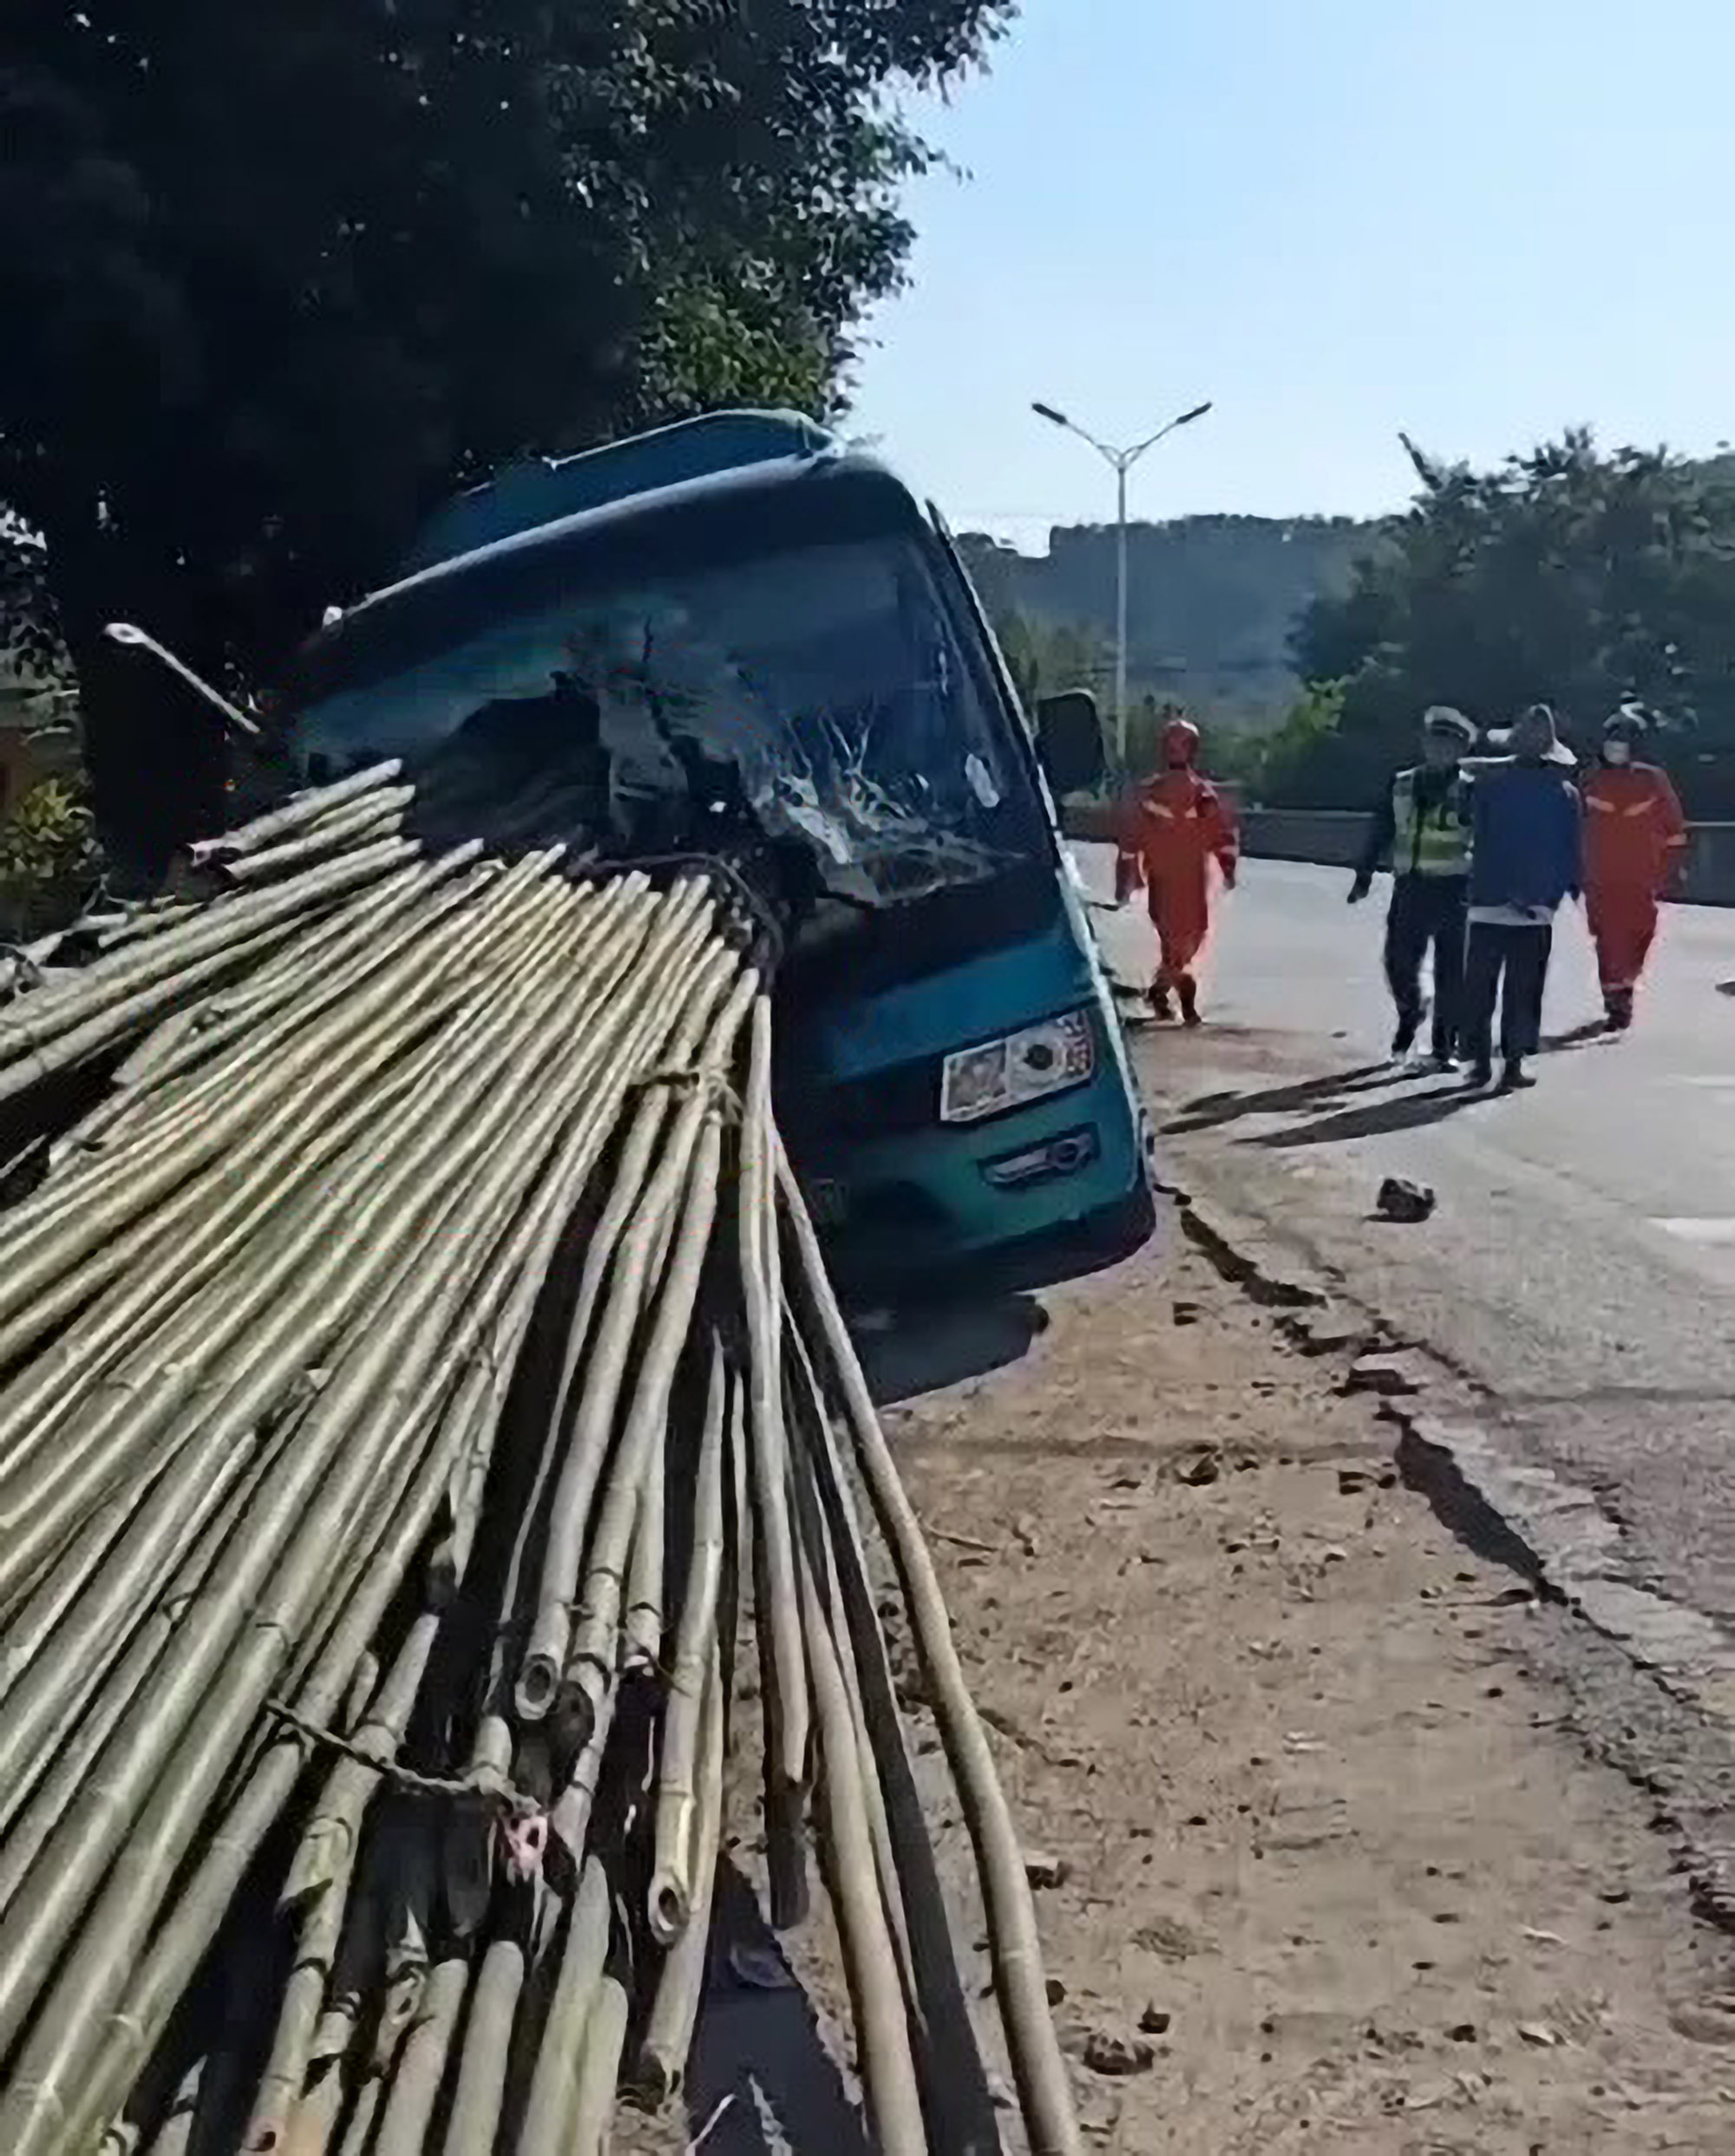 Read more about the article Moment Bus Crashes Into Back Of Tractor Carrying Hundreds of Bamboo Logs That Impale It